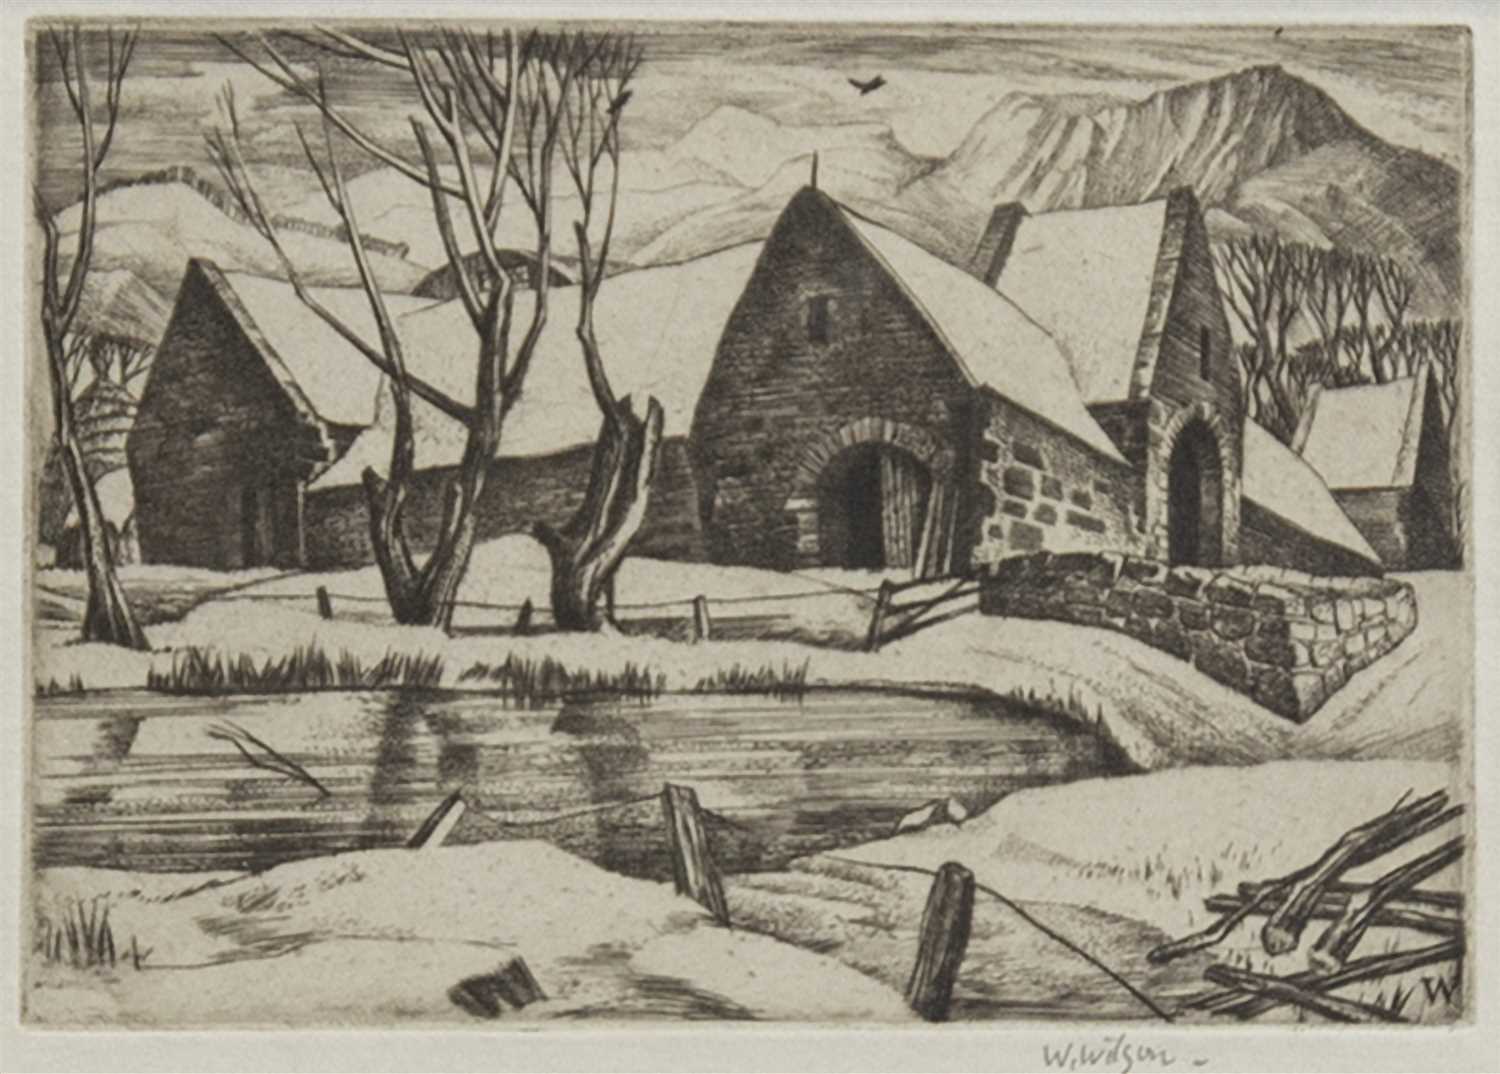 Lot 437 - SWANSTON FARM, AN ETCHING BY WILLIAM WILSON